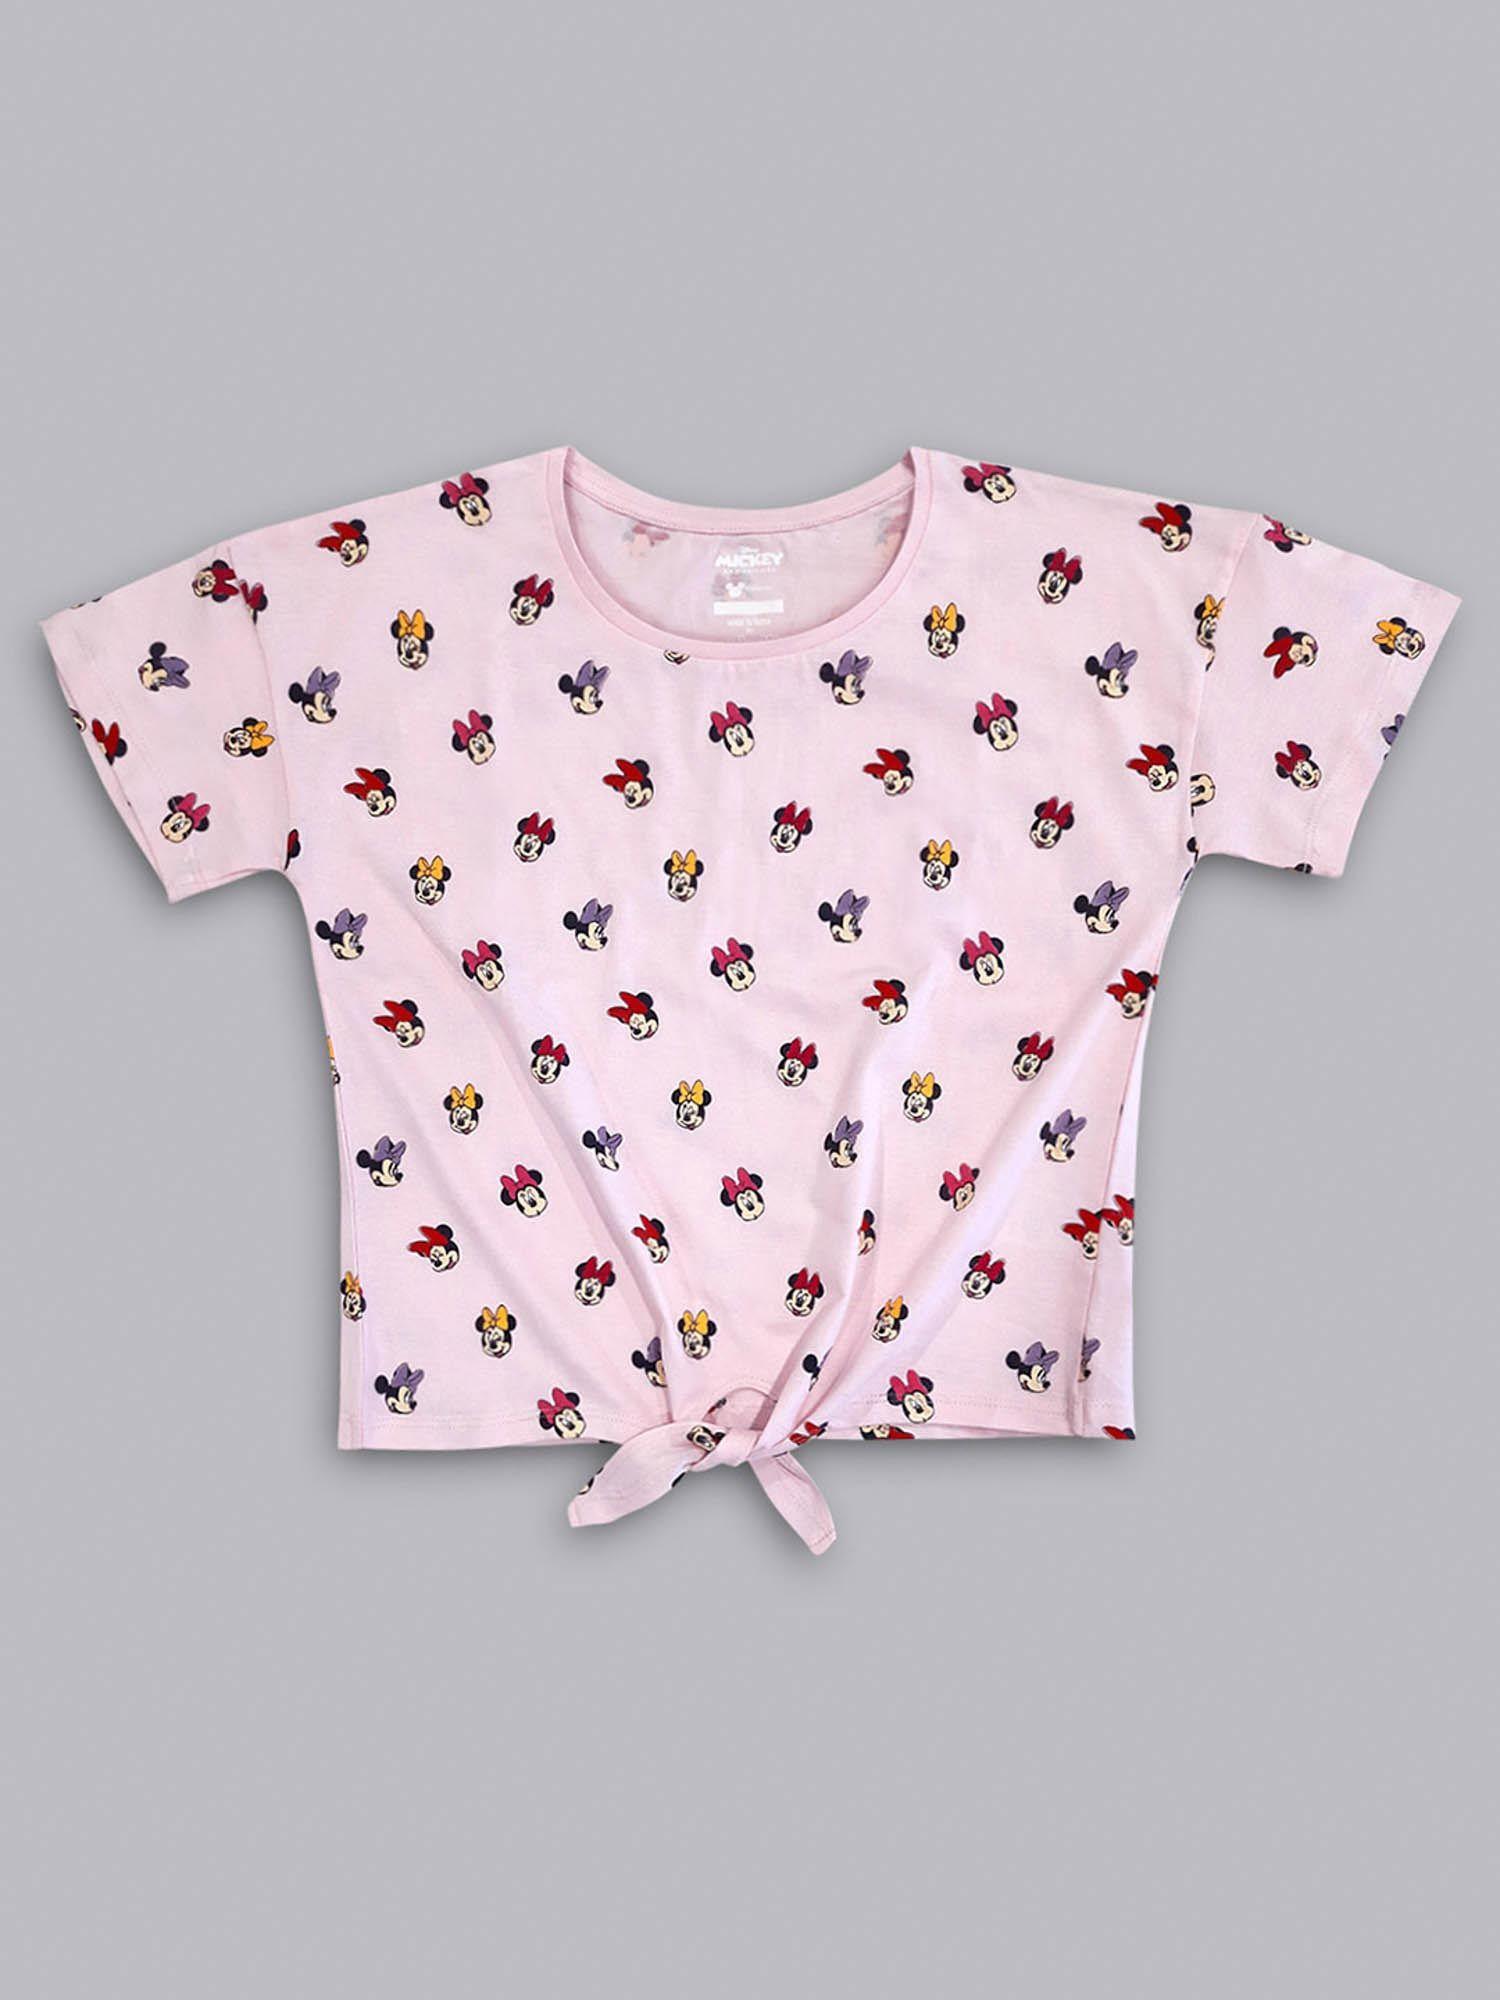 mickey & friends featured top for girls